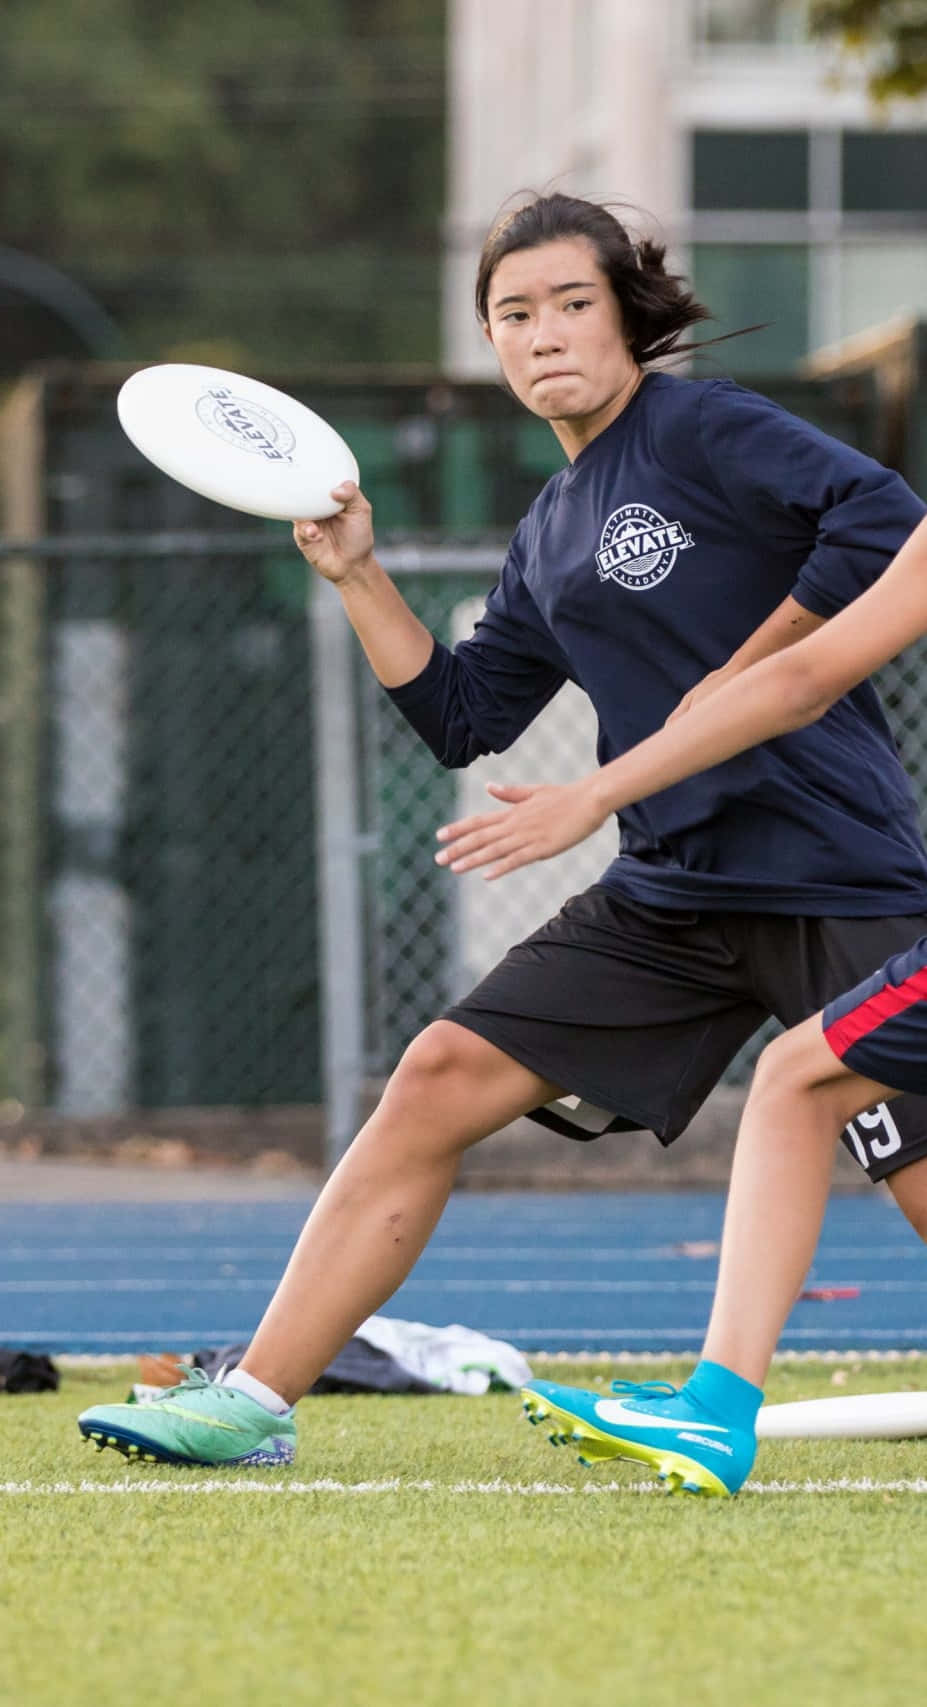 Female Athlete Throwing Android Ultimate Frisbee Background